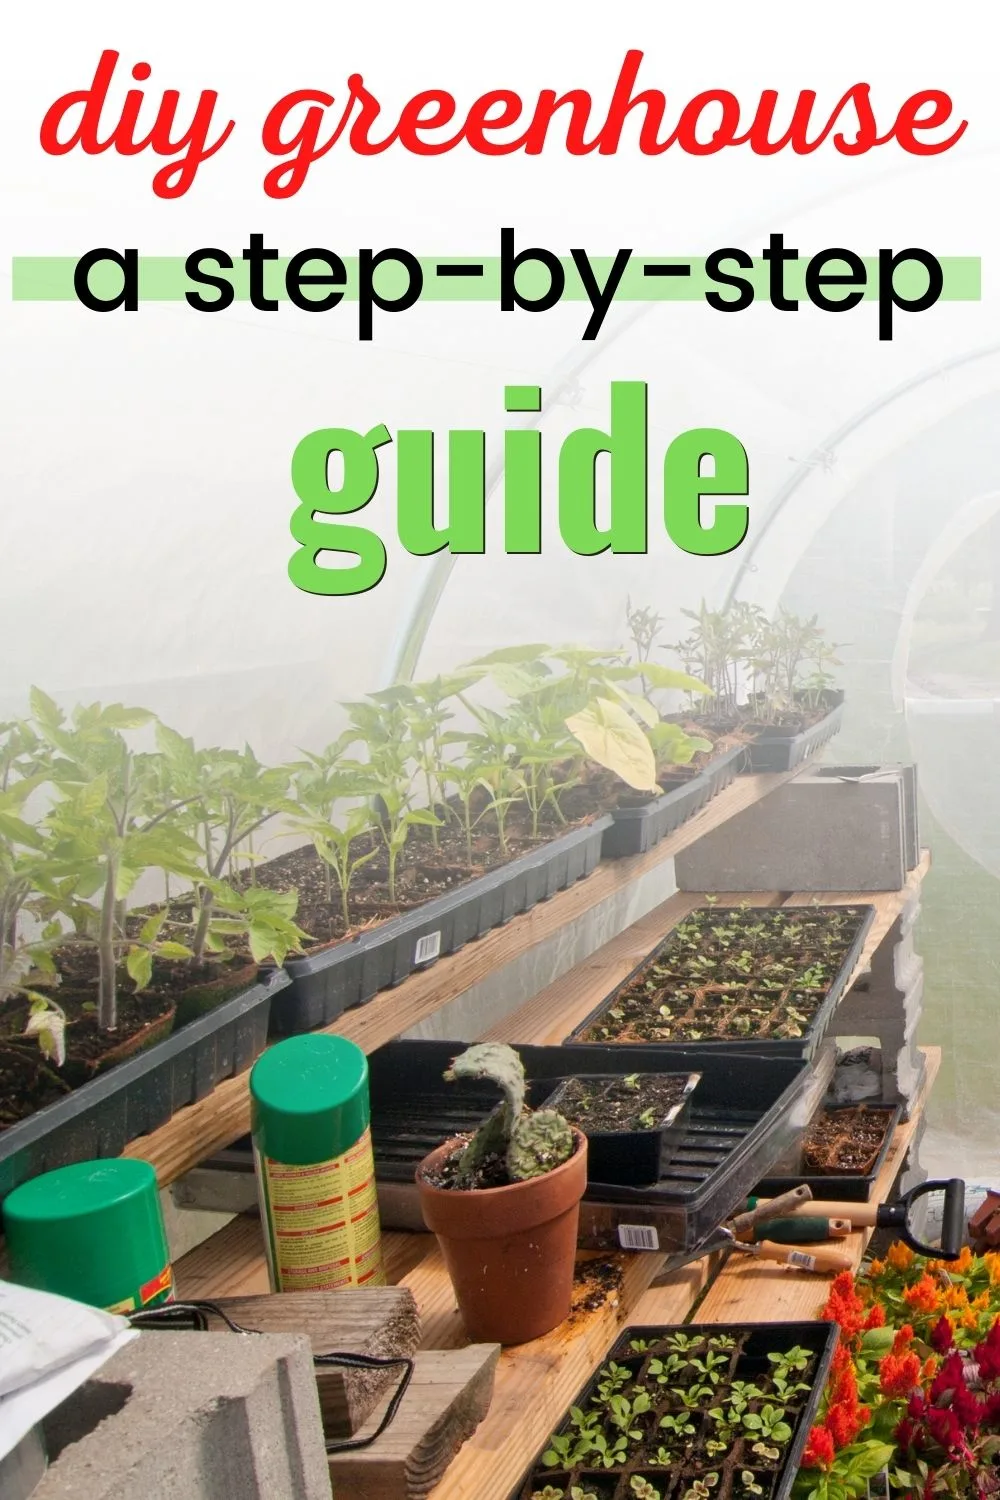 DIY Greenhouse - a step-by-step guide 